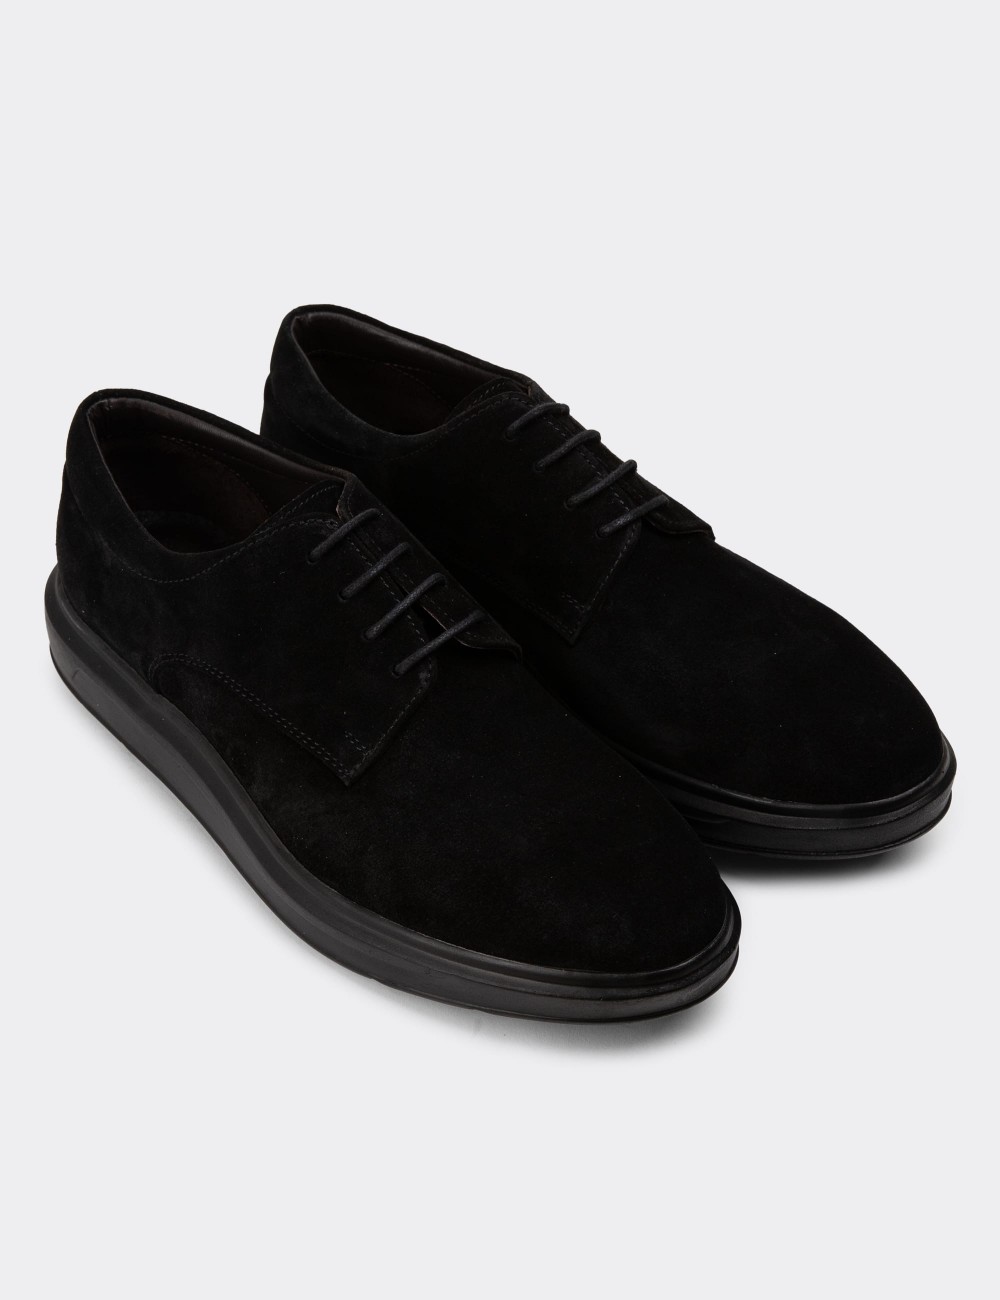 Black Suede Leather Lace-up Shoes - 01934MSYHP01